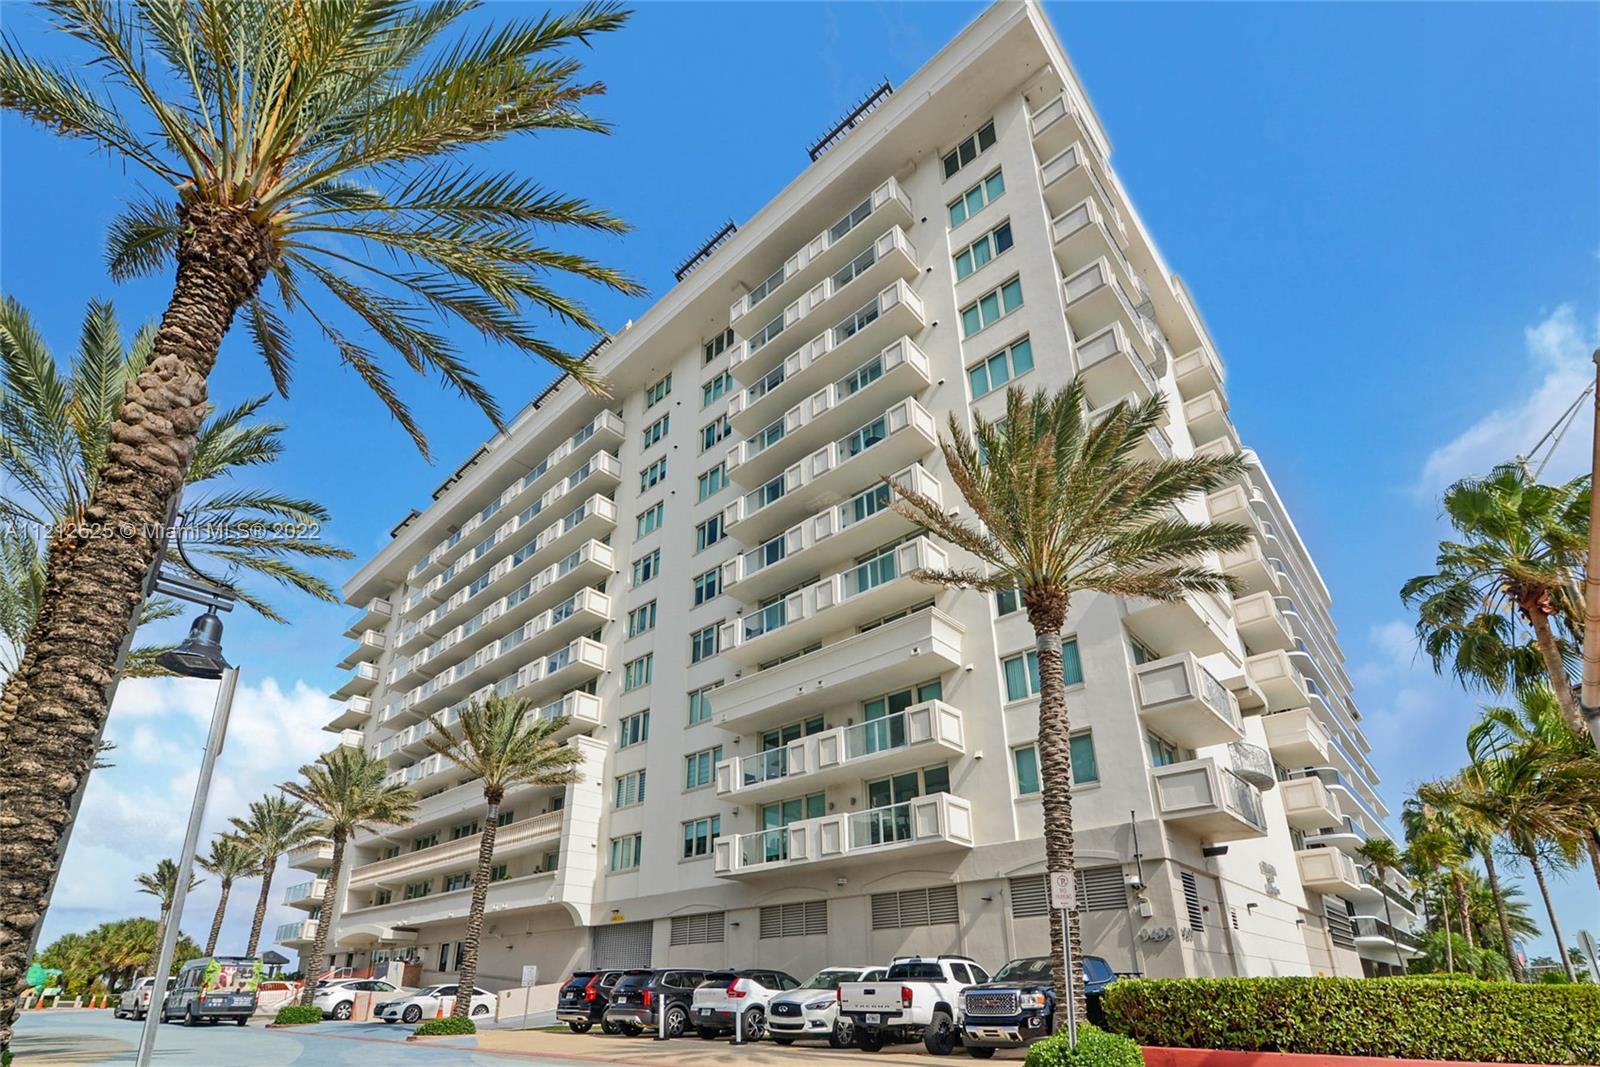 Spiaggia oceanfront boutique condo with partial ocean views, ideally located in Surfside, FL. A cozy